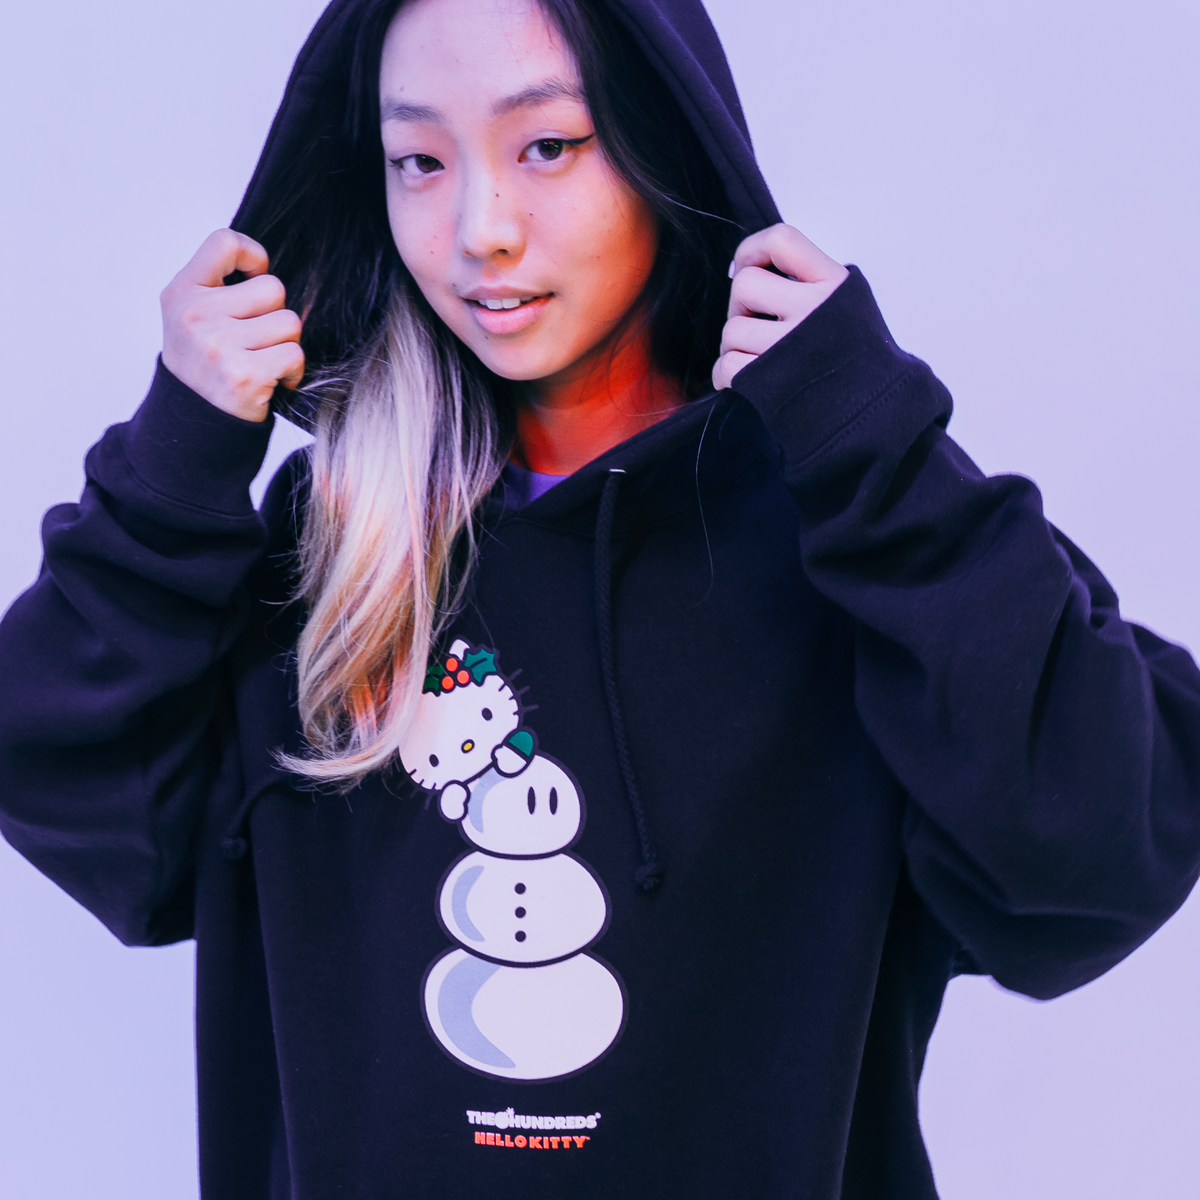 Hello Kitty x The Hundreds Snowman Hoodie Apparel The Hundreds is Huge   